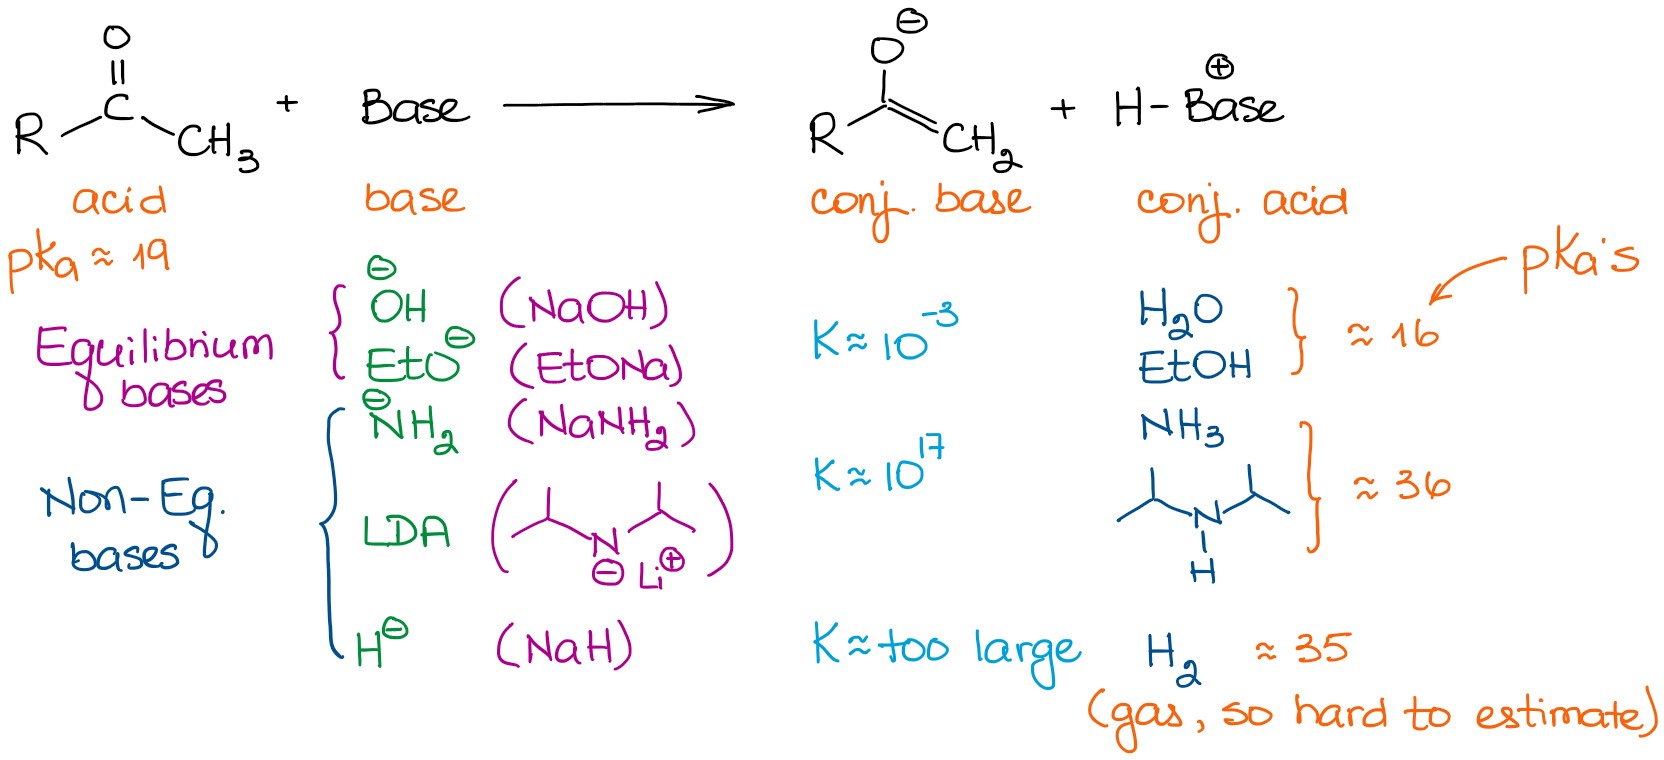 various bases used for enolization of aldehydes and ketones